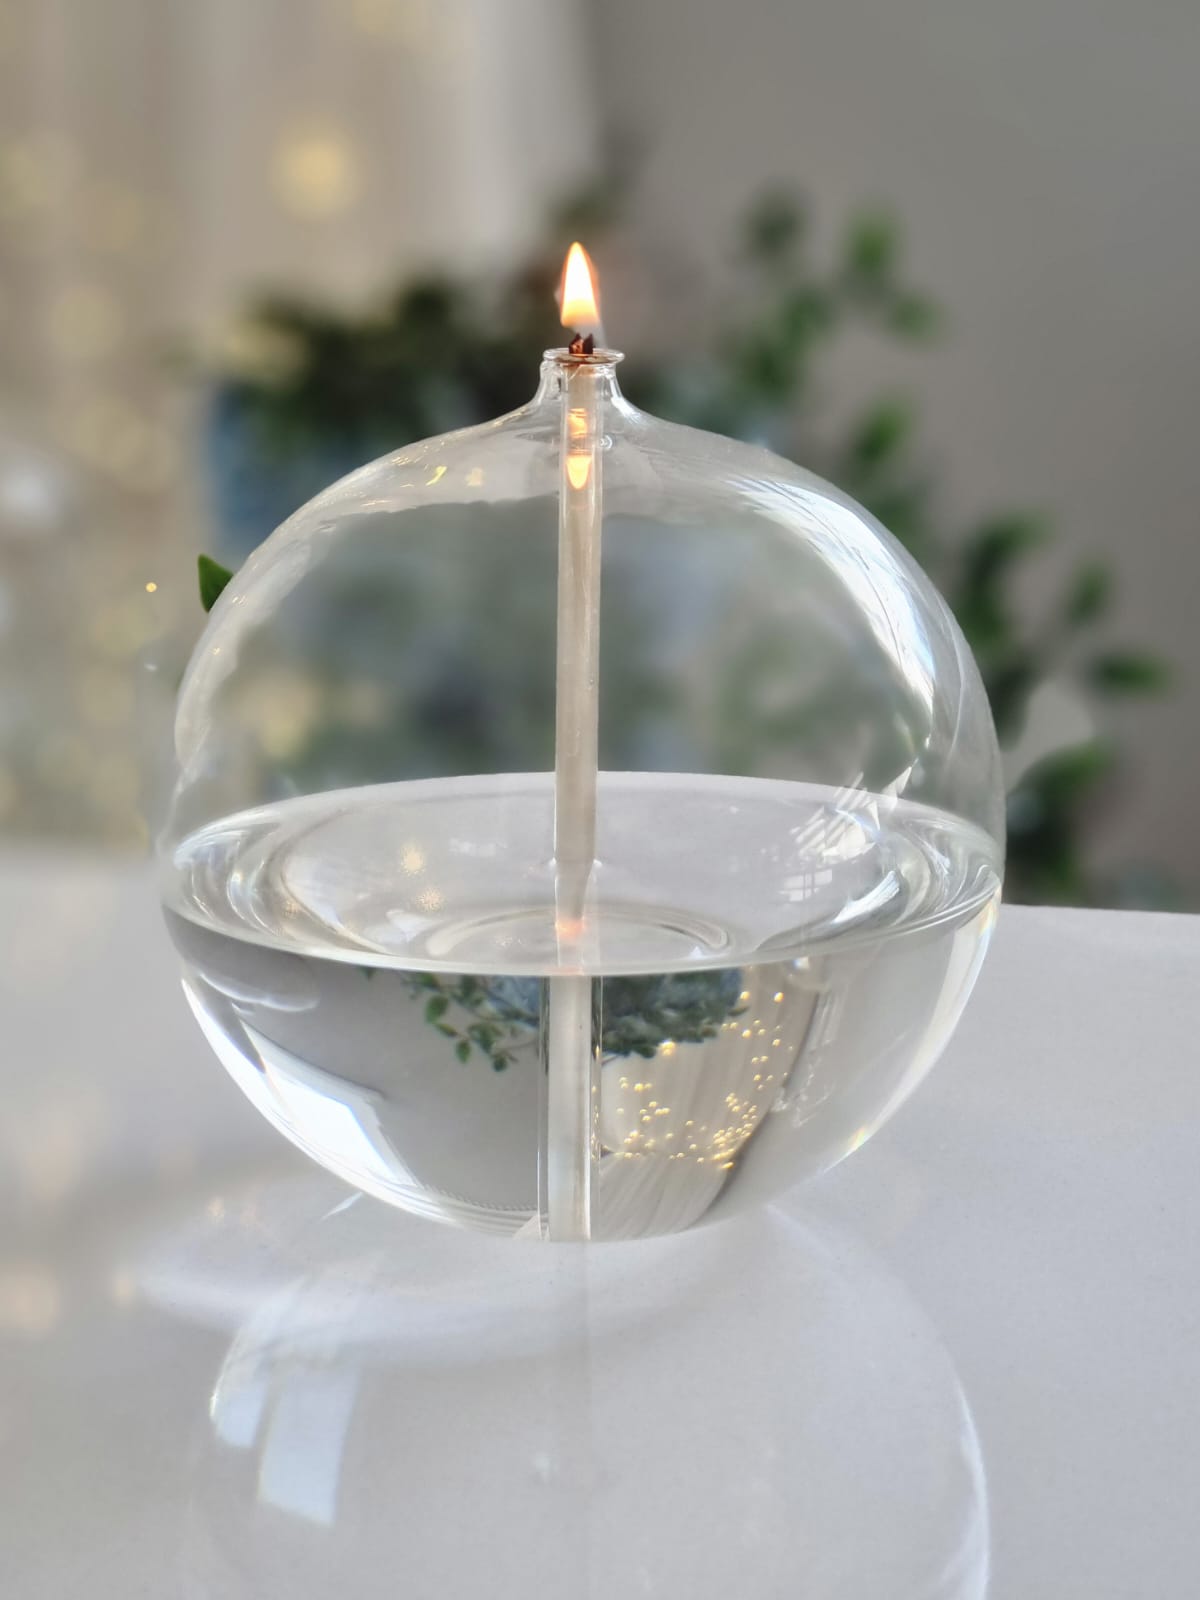 Quem Clear Handmade Big Balloon Glass Oil Candle, Home and Office Clear Ball Candle, Glass Ball Gift.